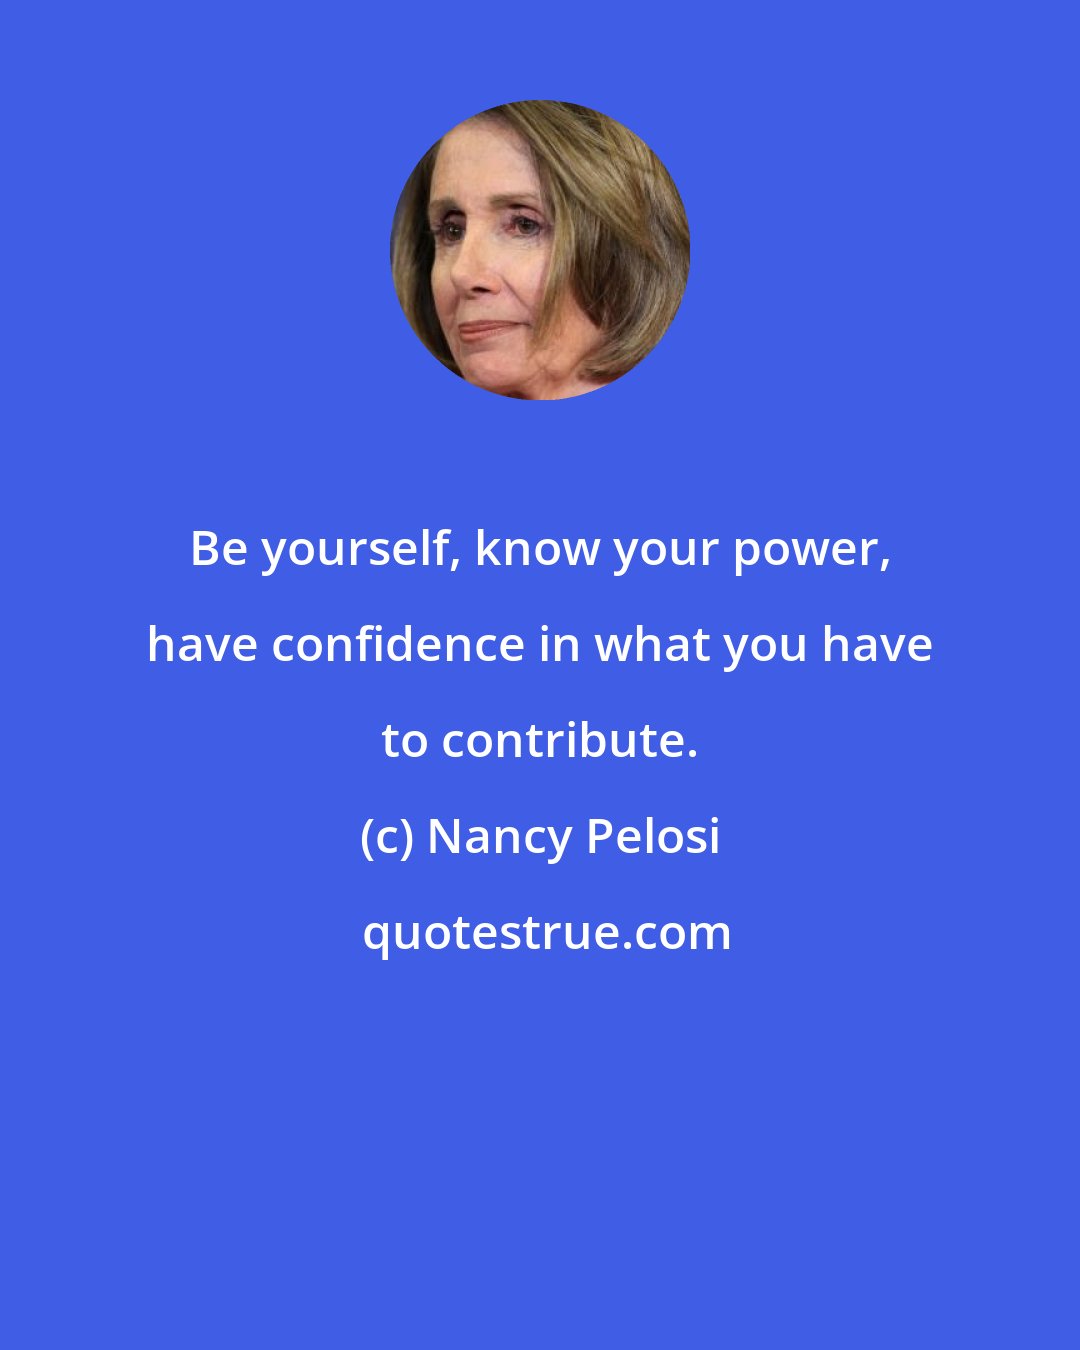 Nancy Pelosi: Be yourself, know your power, have confidence in what you have to contribute.